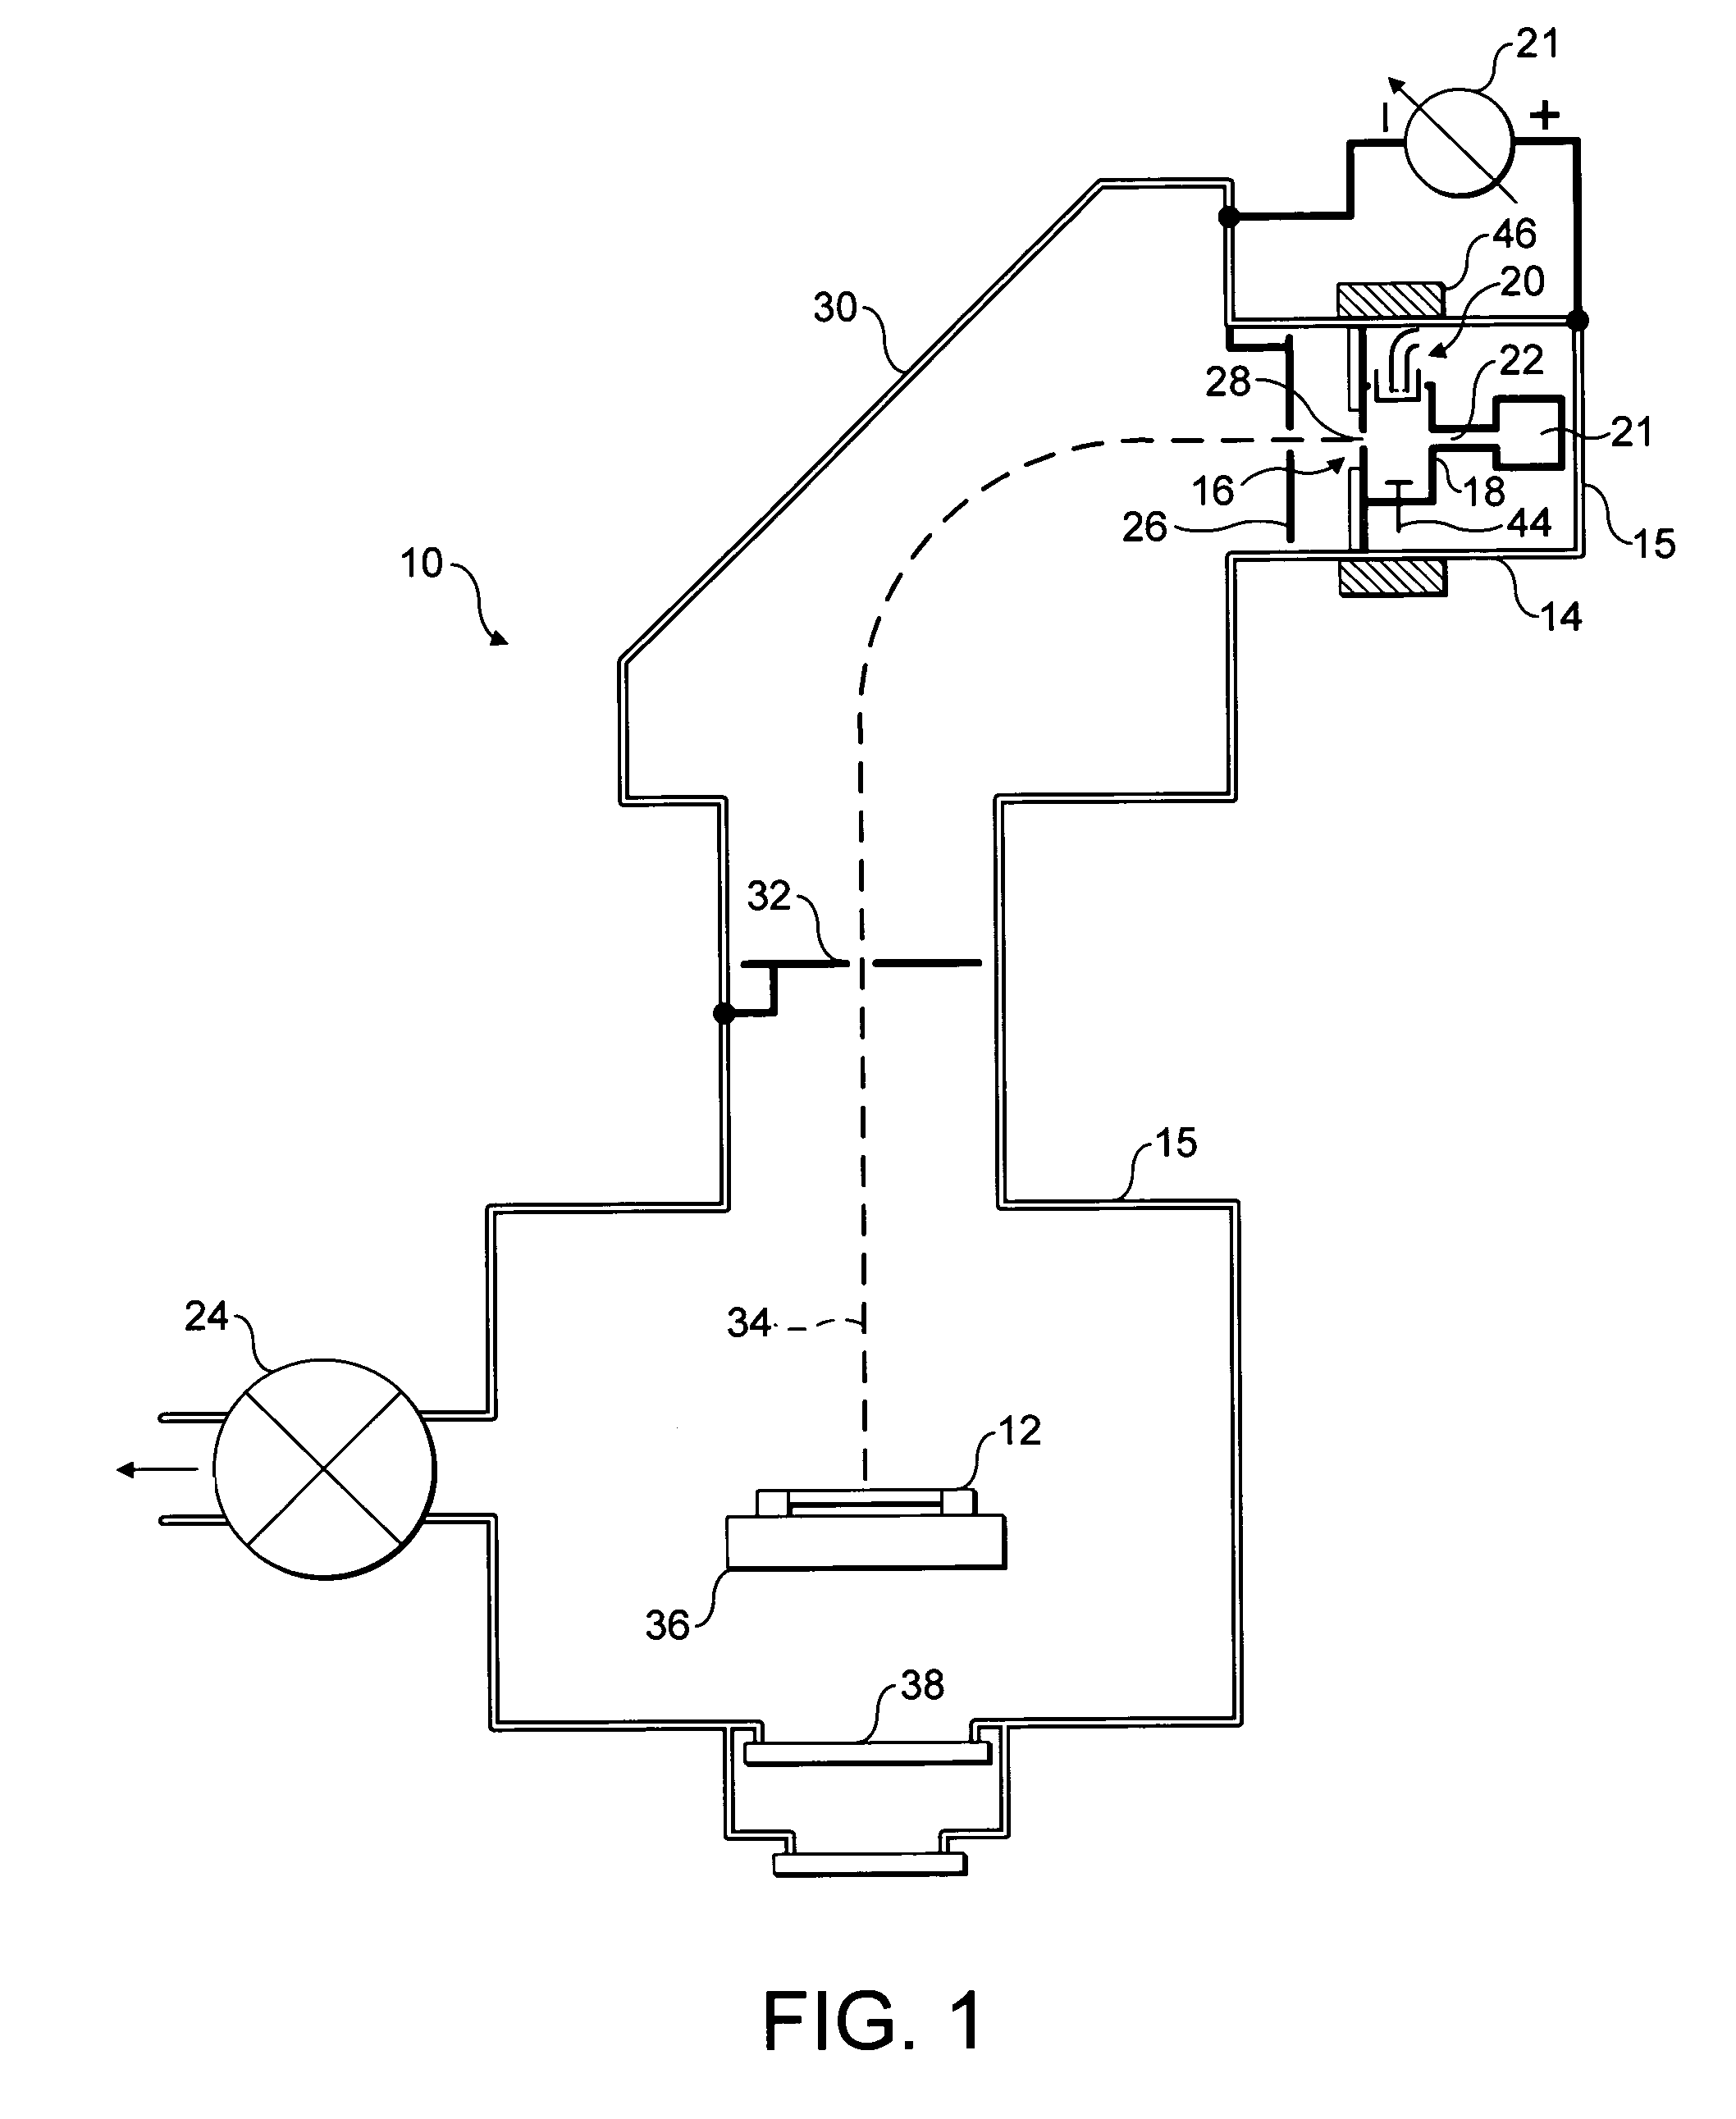 Method of producing a dopant gas species